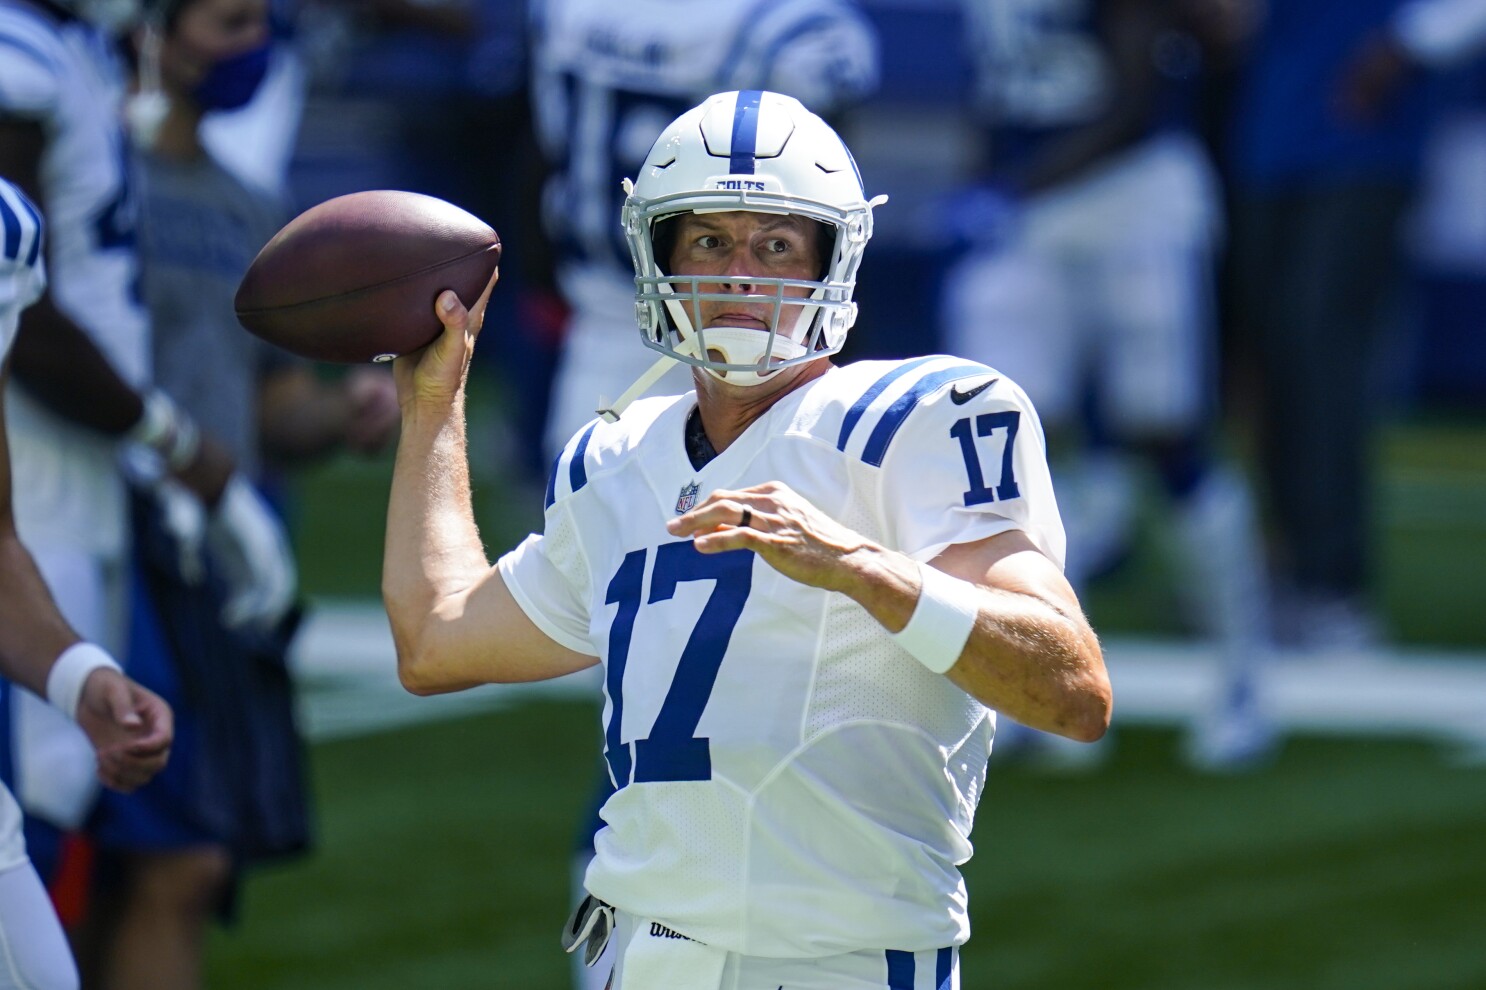 Philip Rivers In New Spot Colts Bolts Favored To Open 1 0 The San Diego Union Tribune